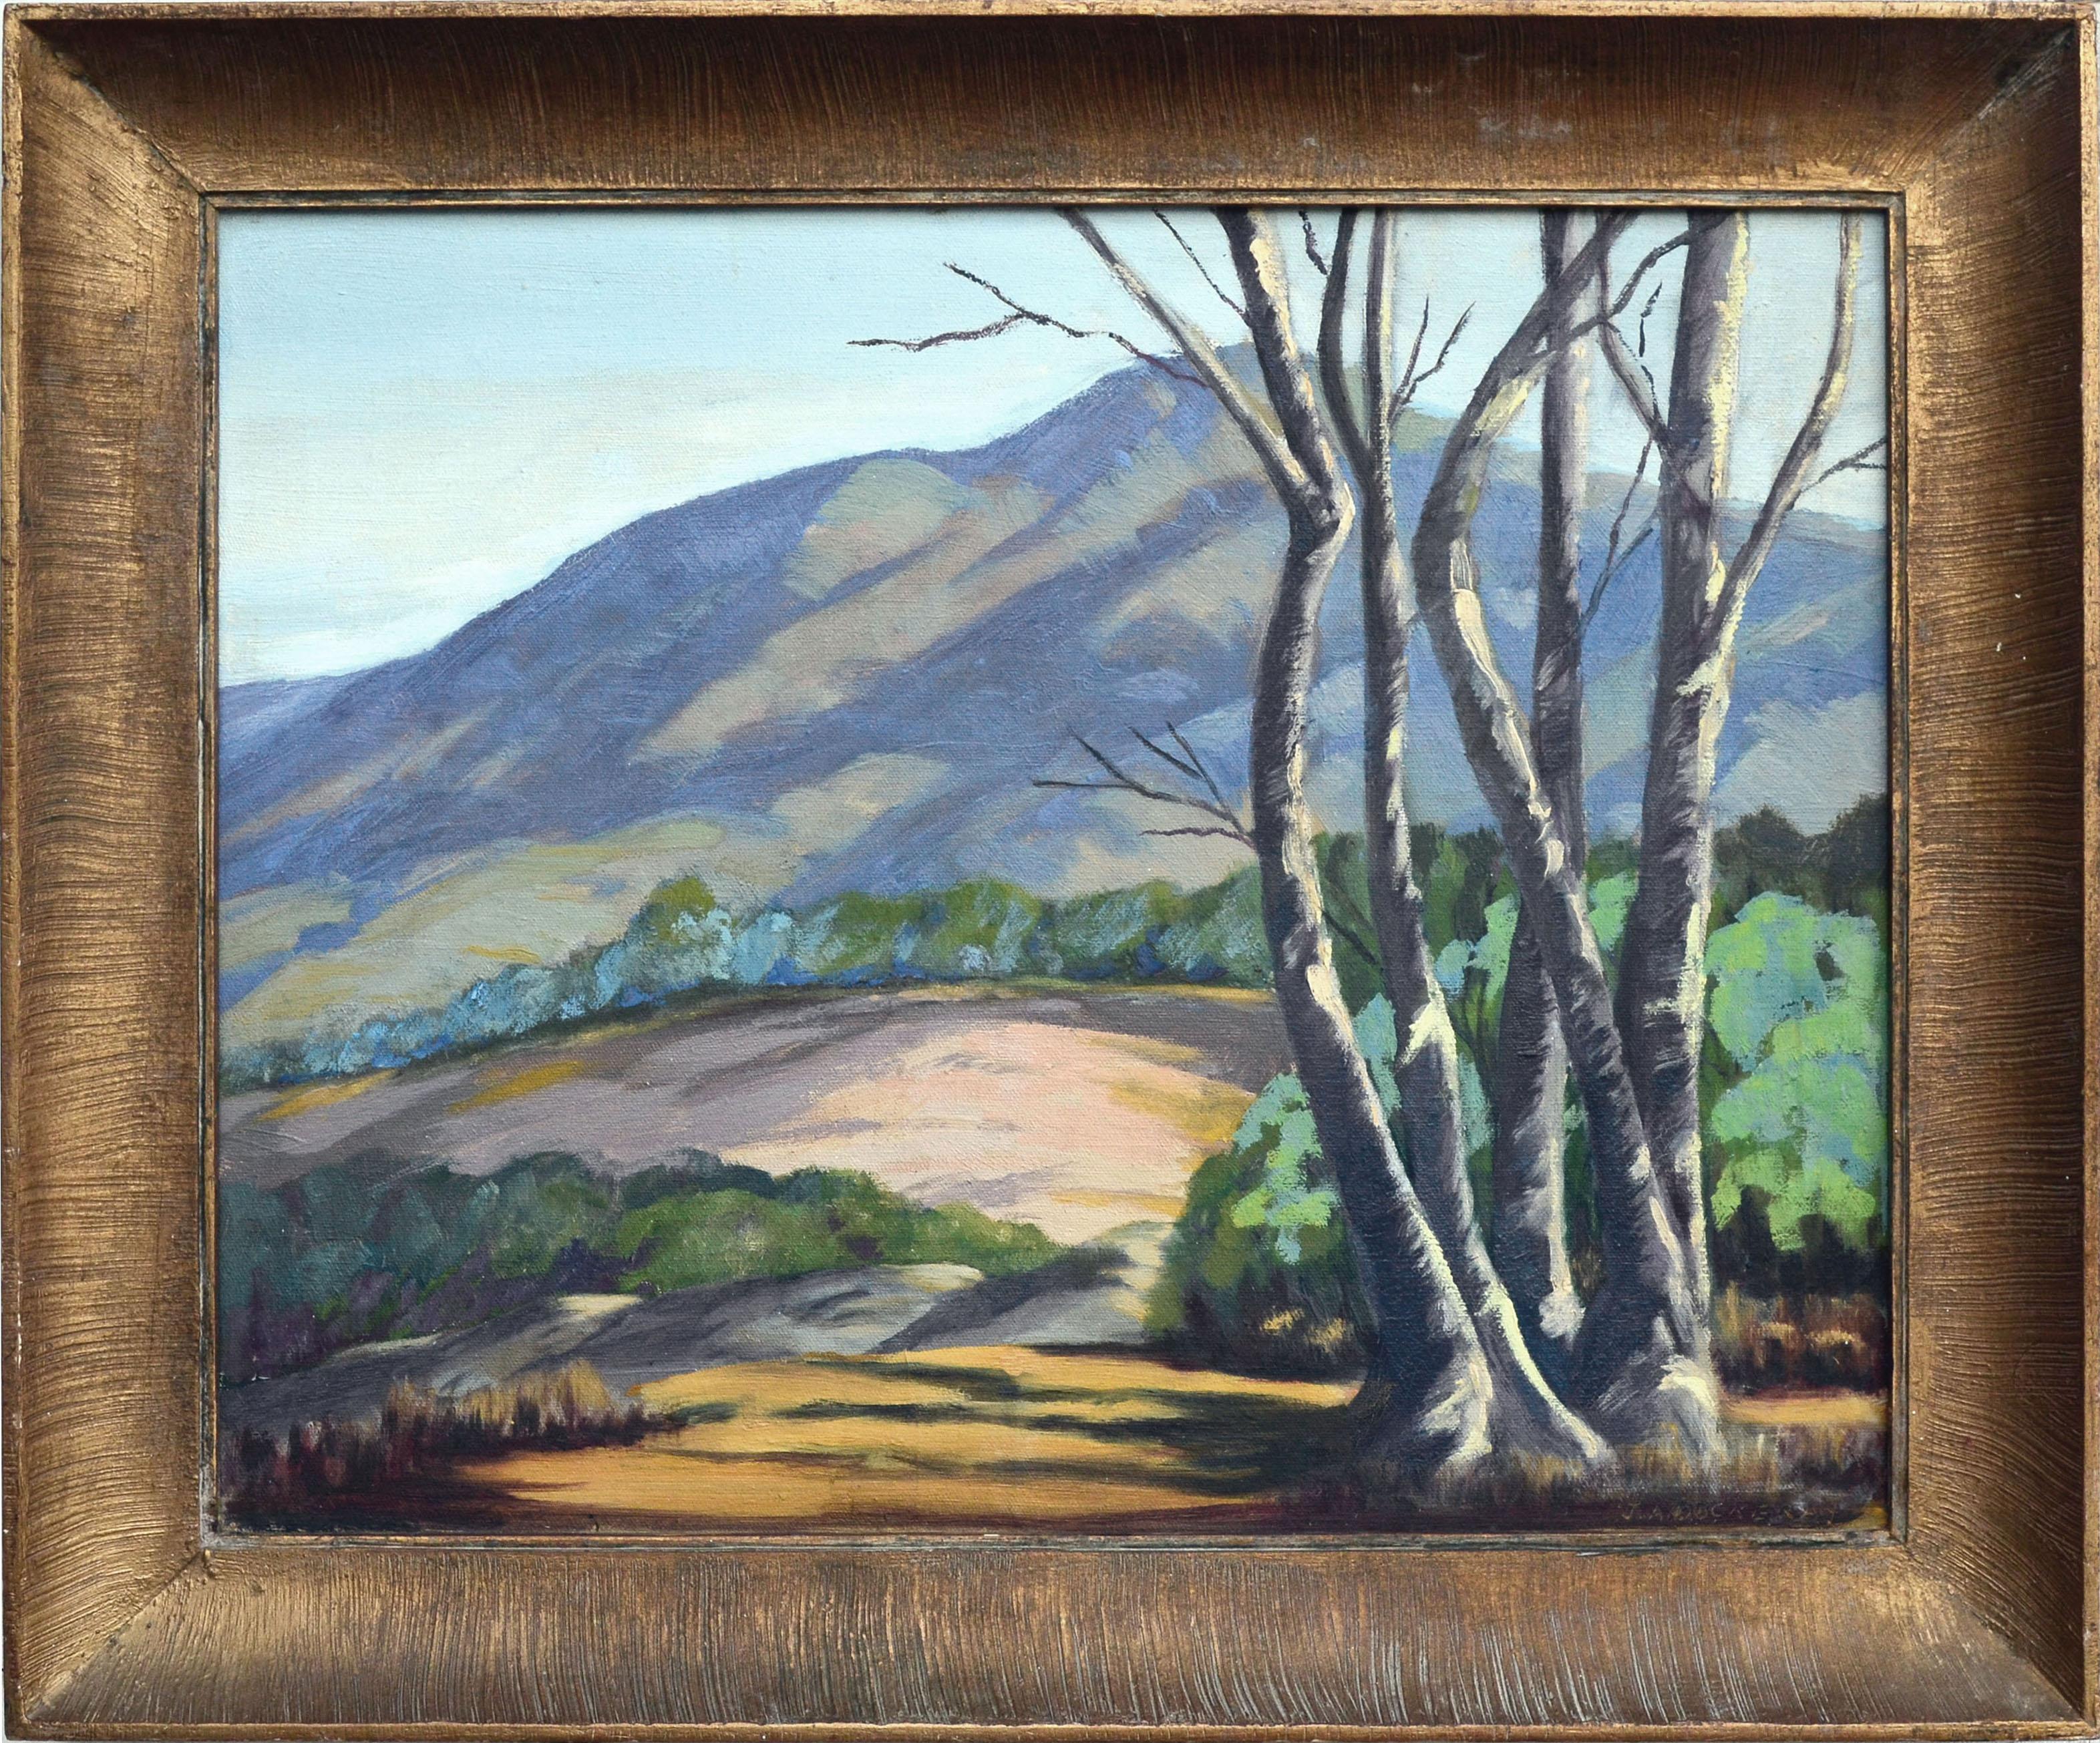 J.A. Dockeray Landscape Painting - "Dawn in the Foothills", Mid Century California Landscape with Birch Trees